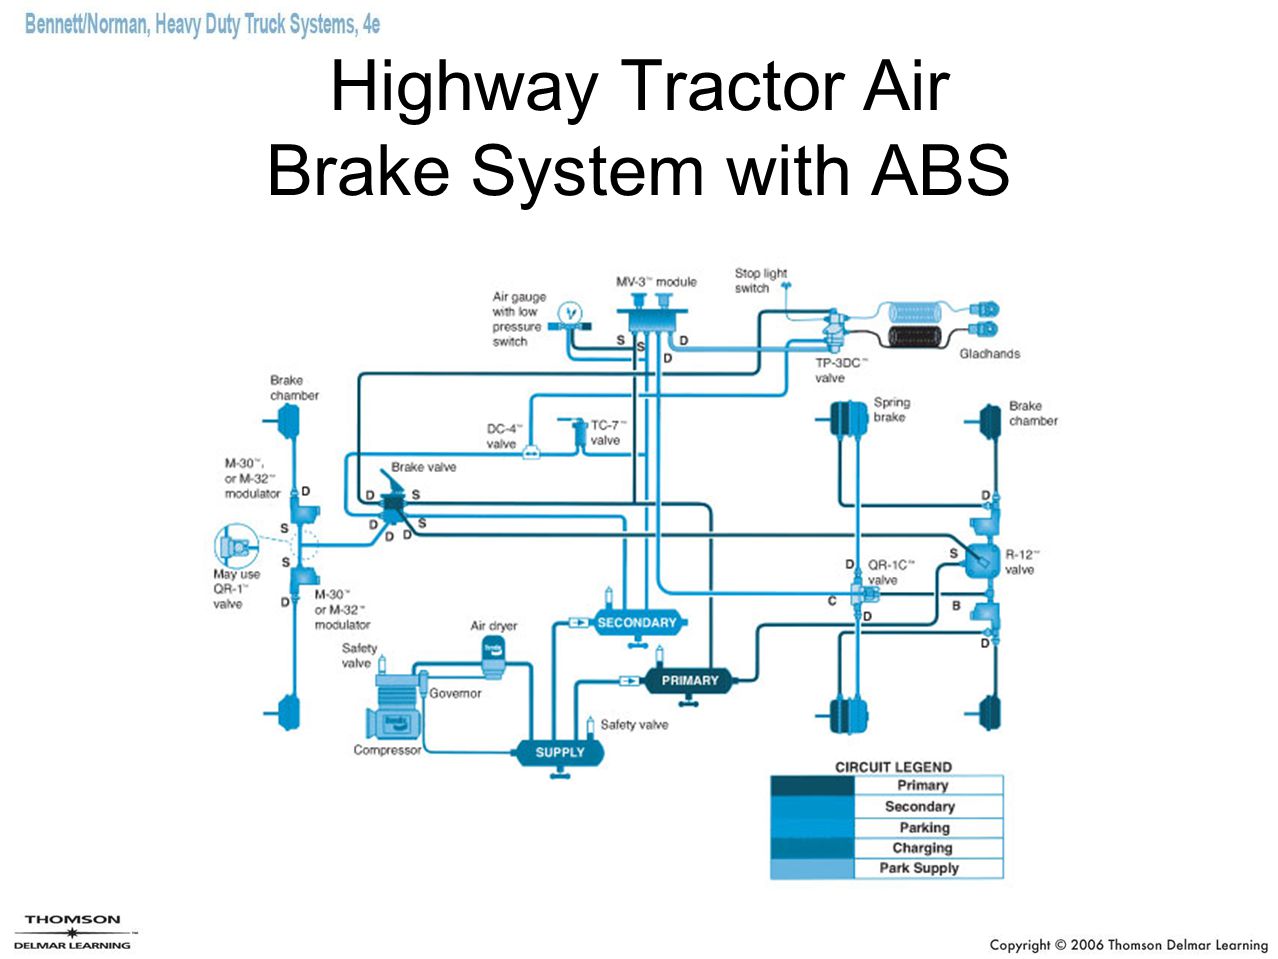 Highway+Tractor+Air+Brake+System+with+ABS.jpg